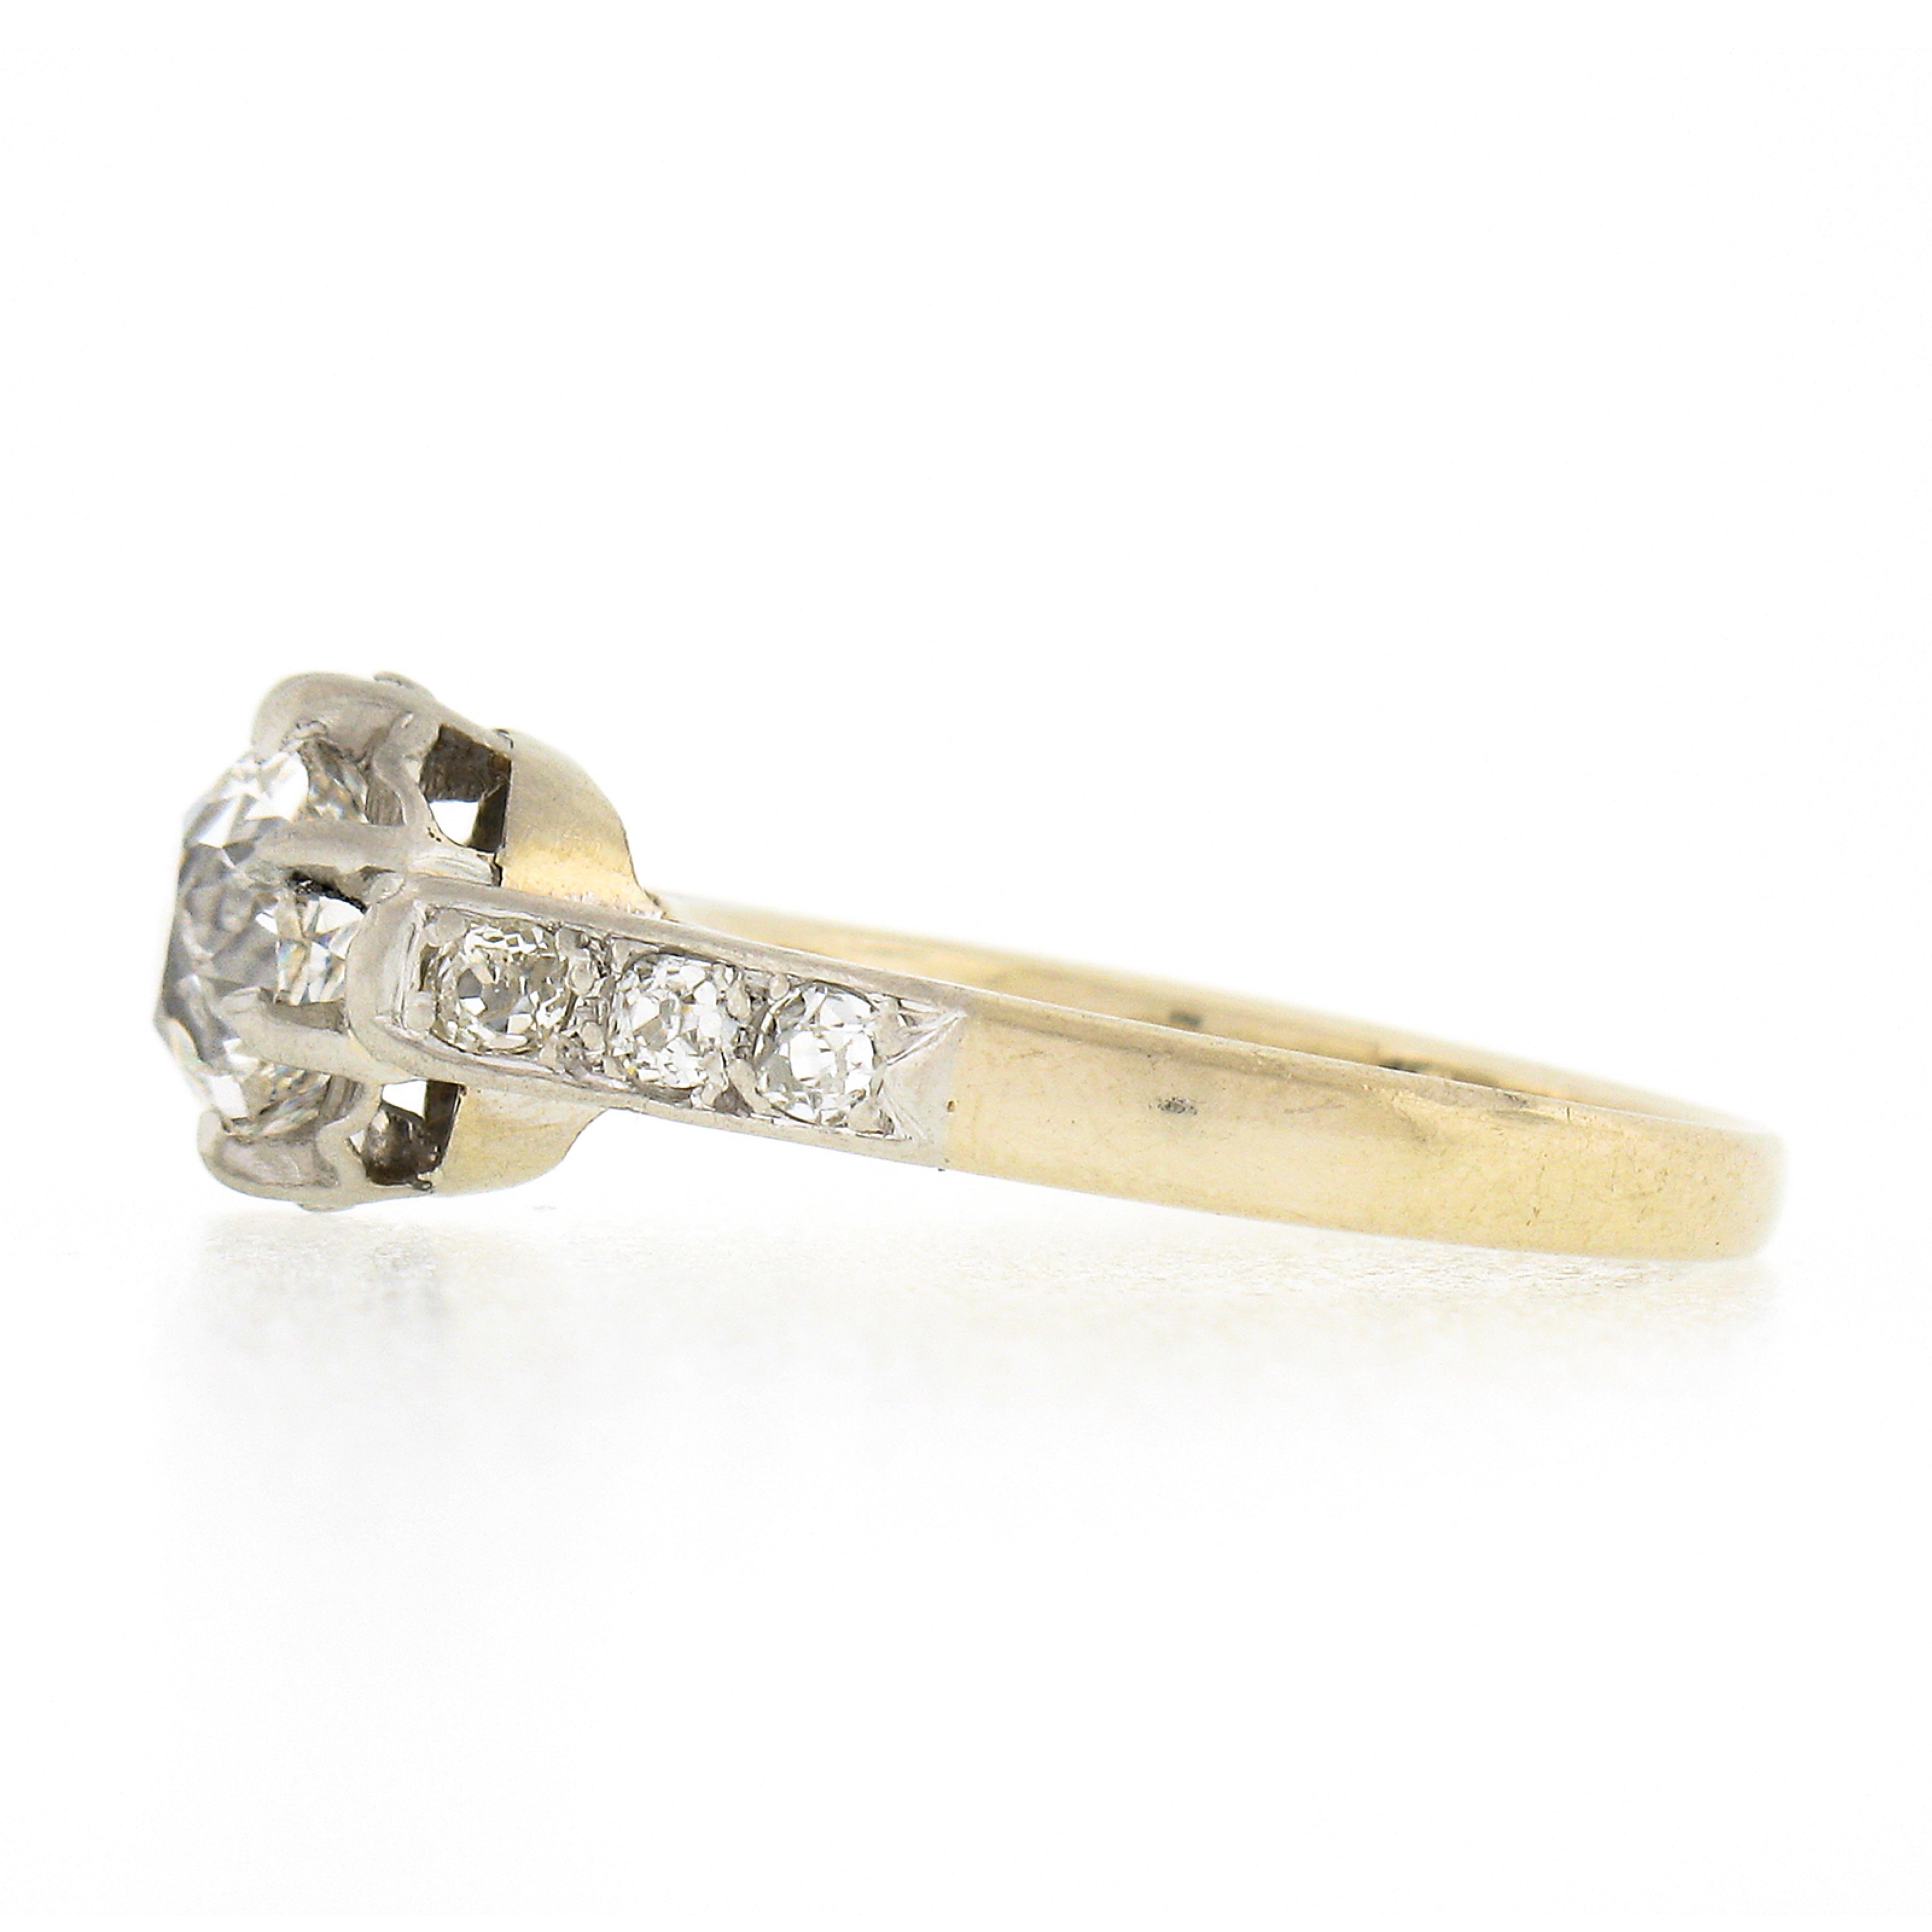 Antique Edwardian French Plat 18k Gold 1.7ct GIA European Diamond Solitaire Ring For Sale 1